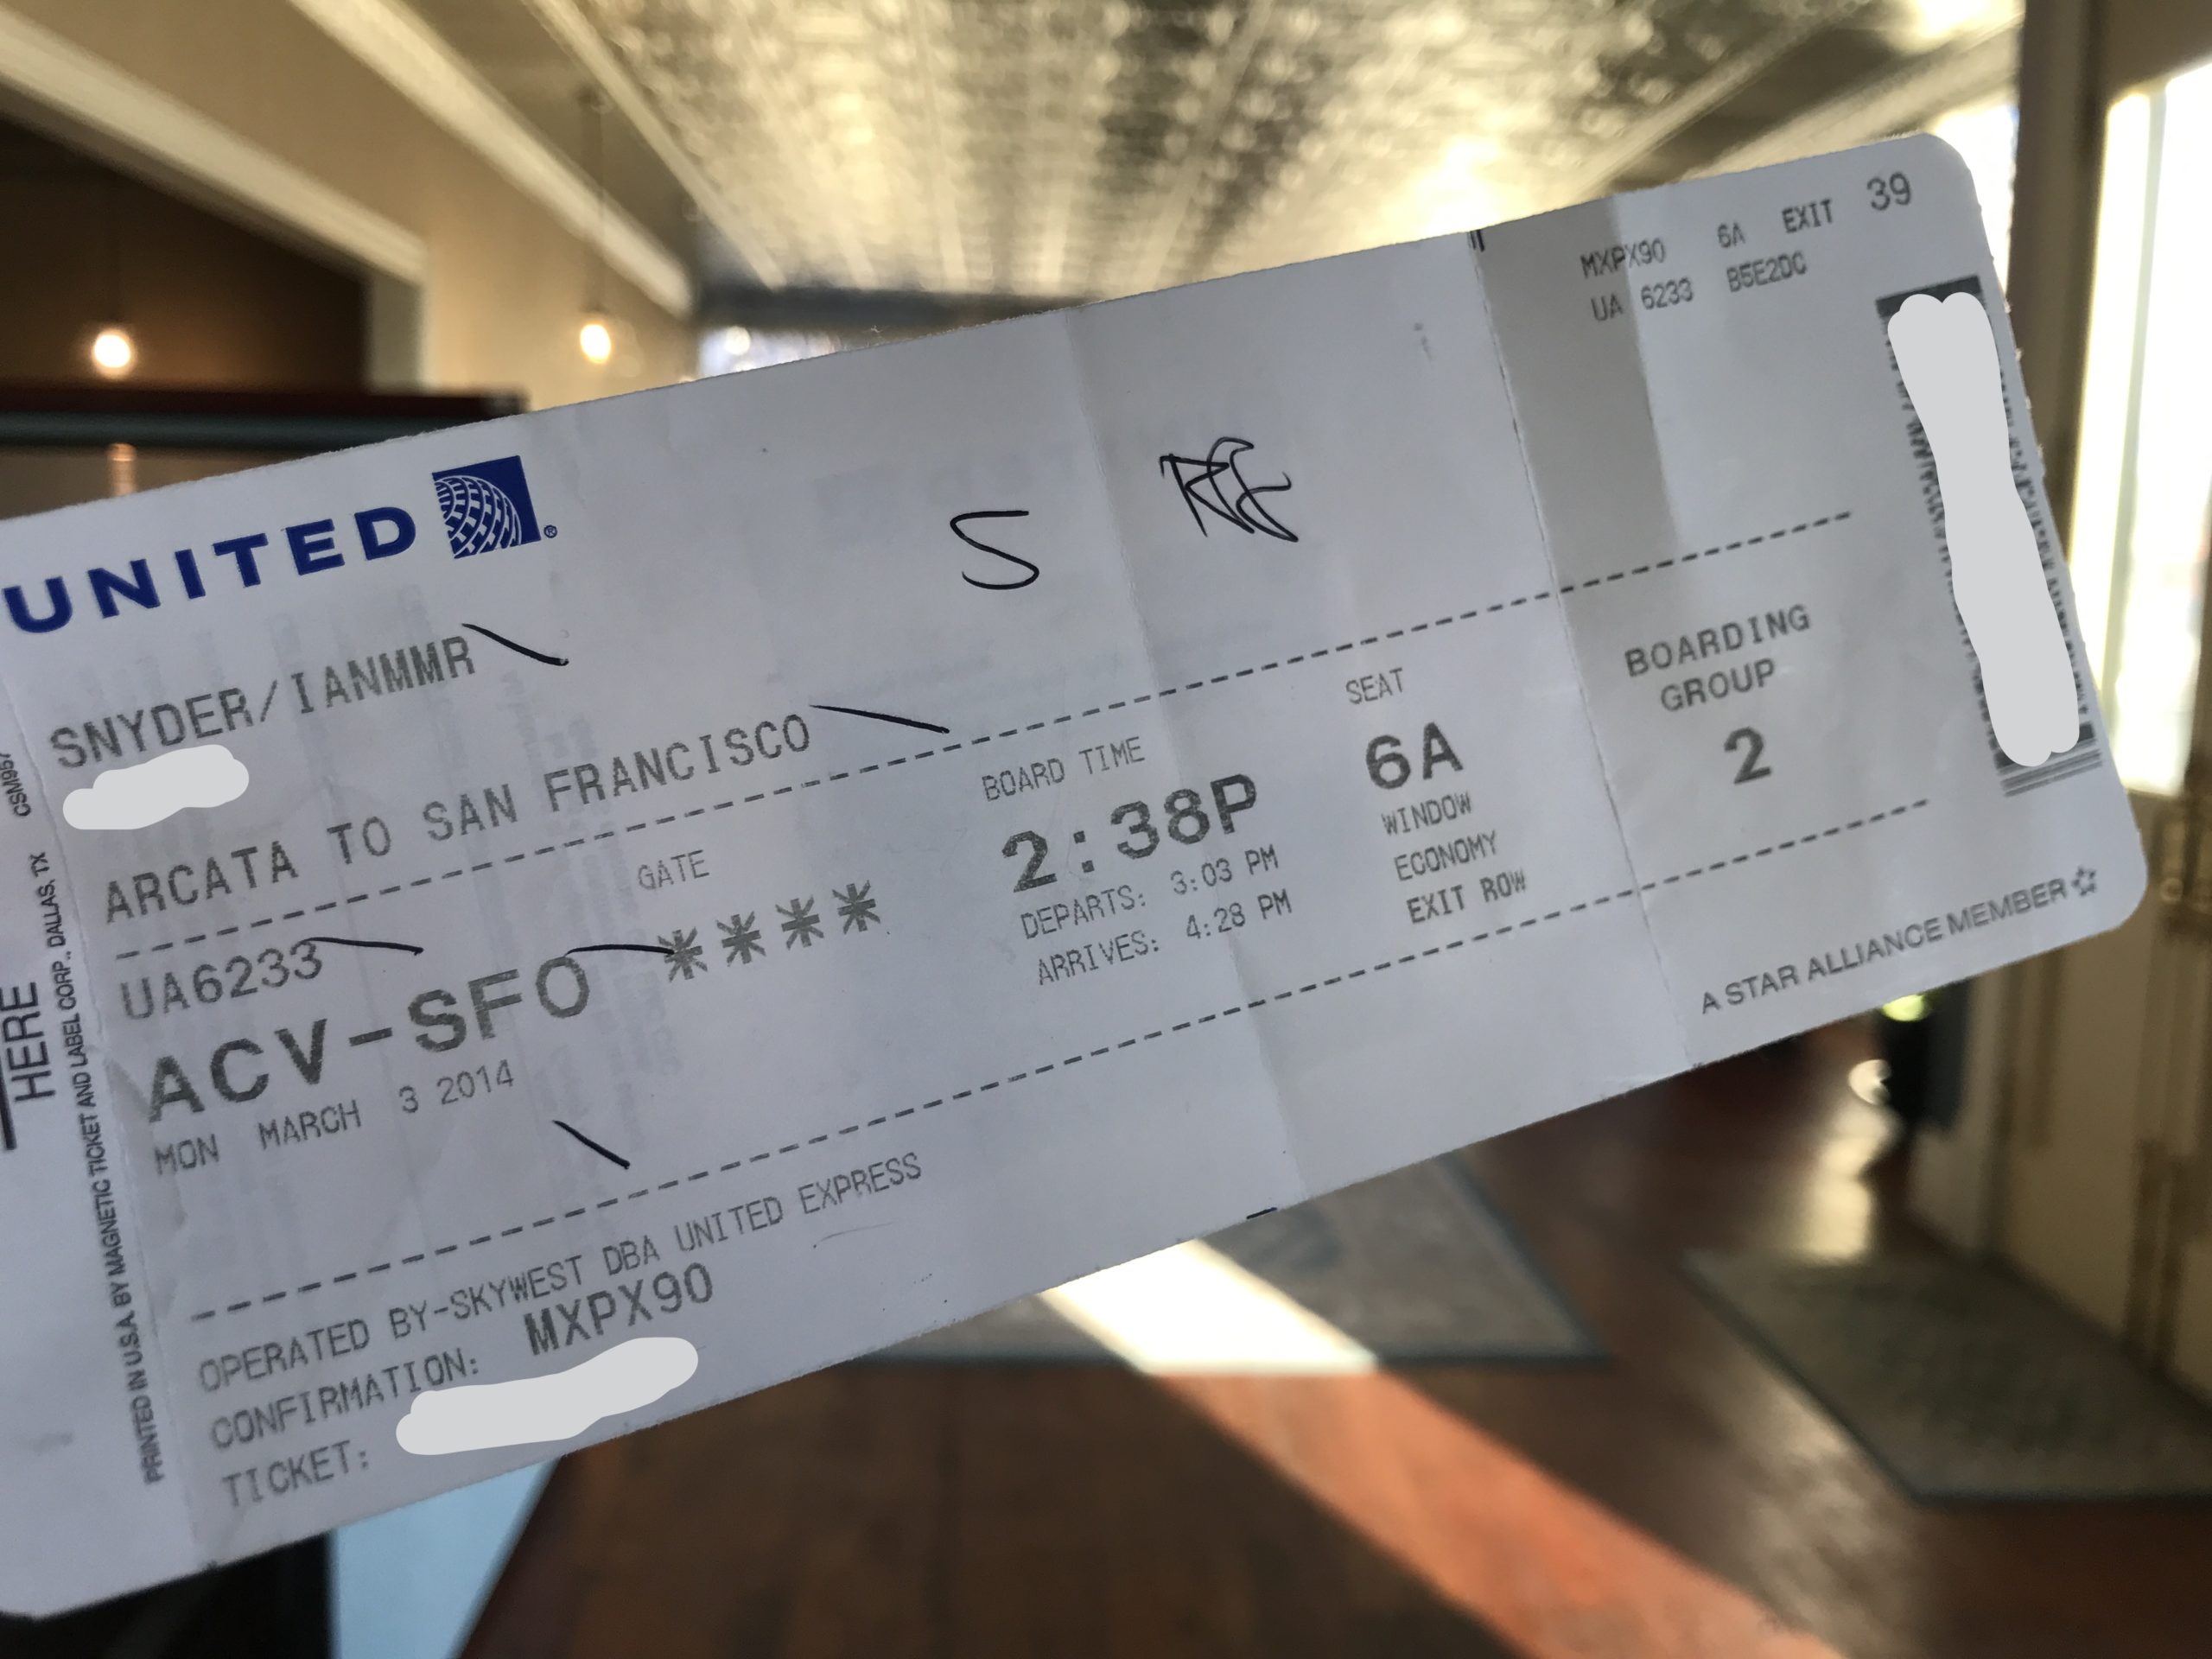 Nostalgia: Finding An Old Boarding Pass After 7 Years - Travel Update